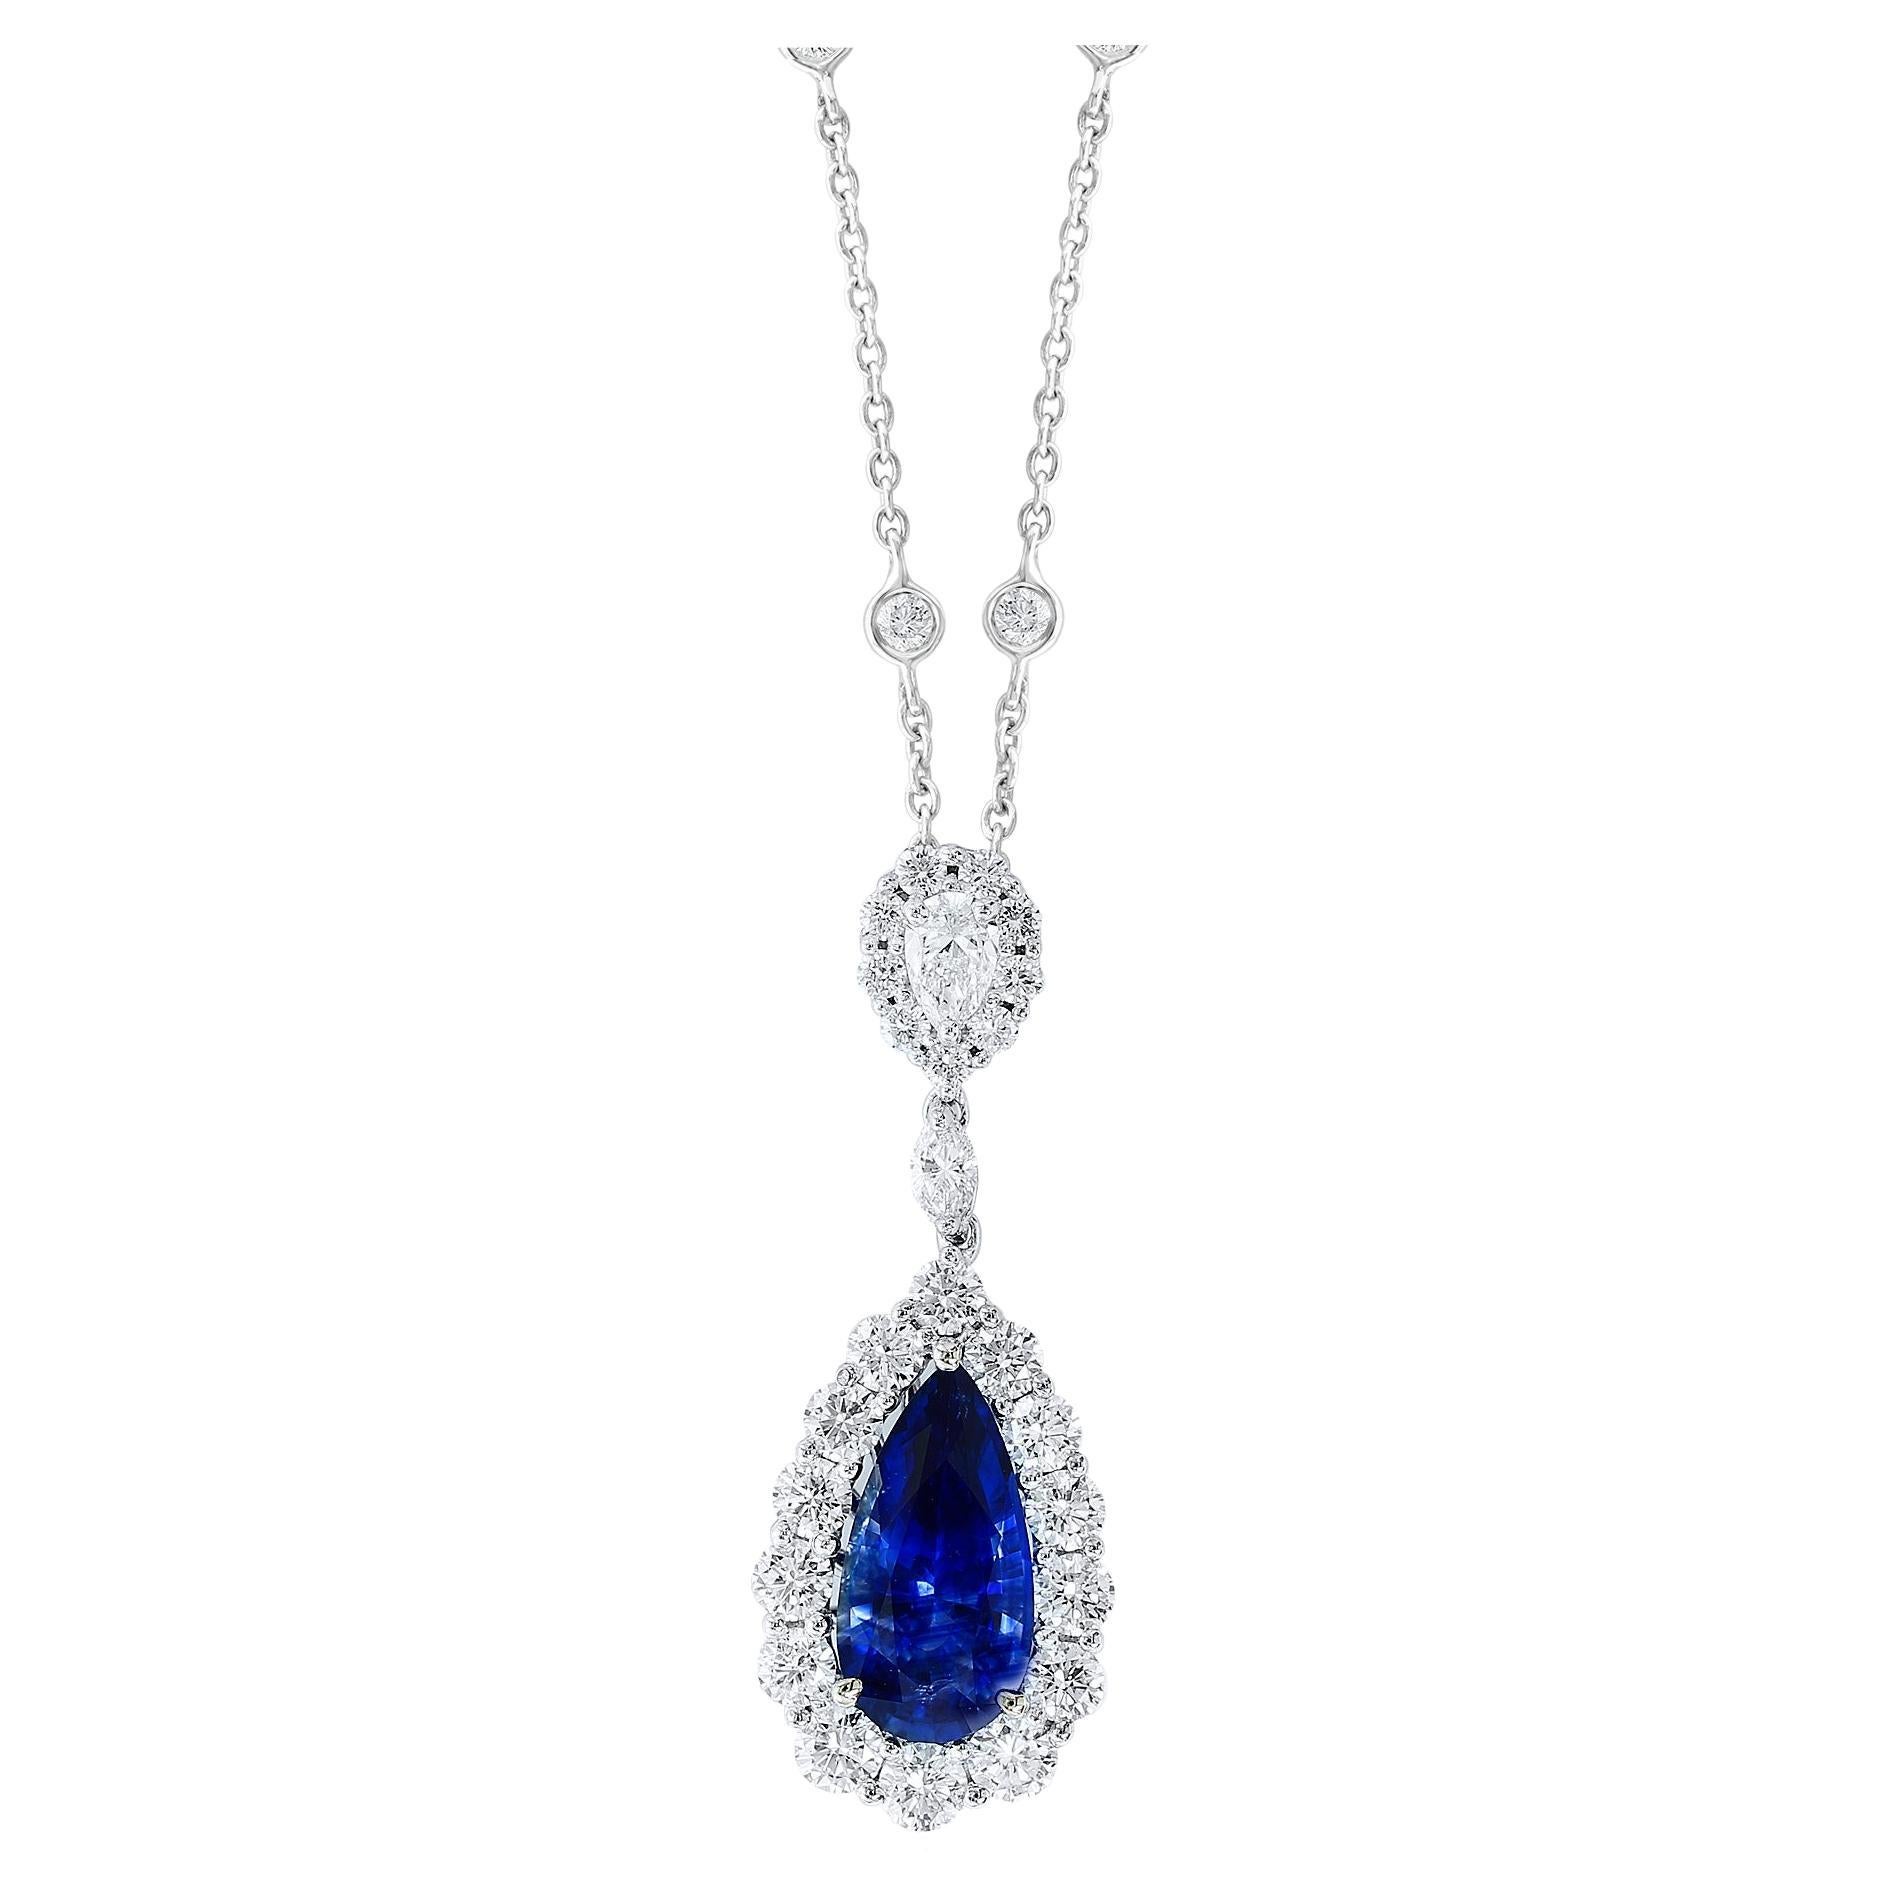 4.35 Carat Pear shape Sapphire and Diamond Drop Necklace in 18K White Gold